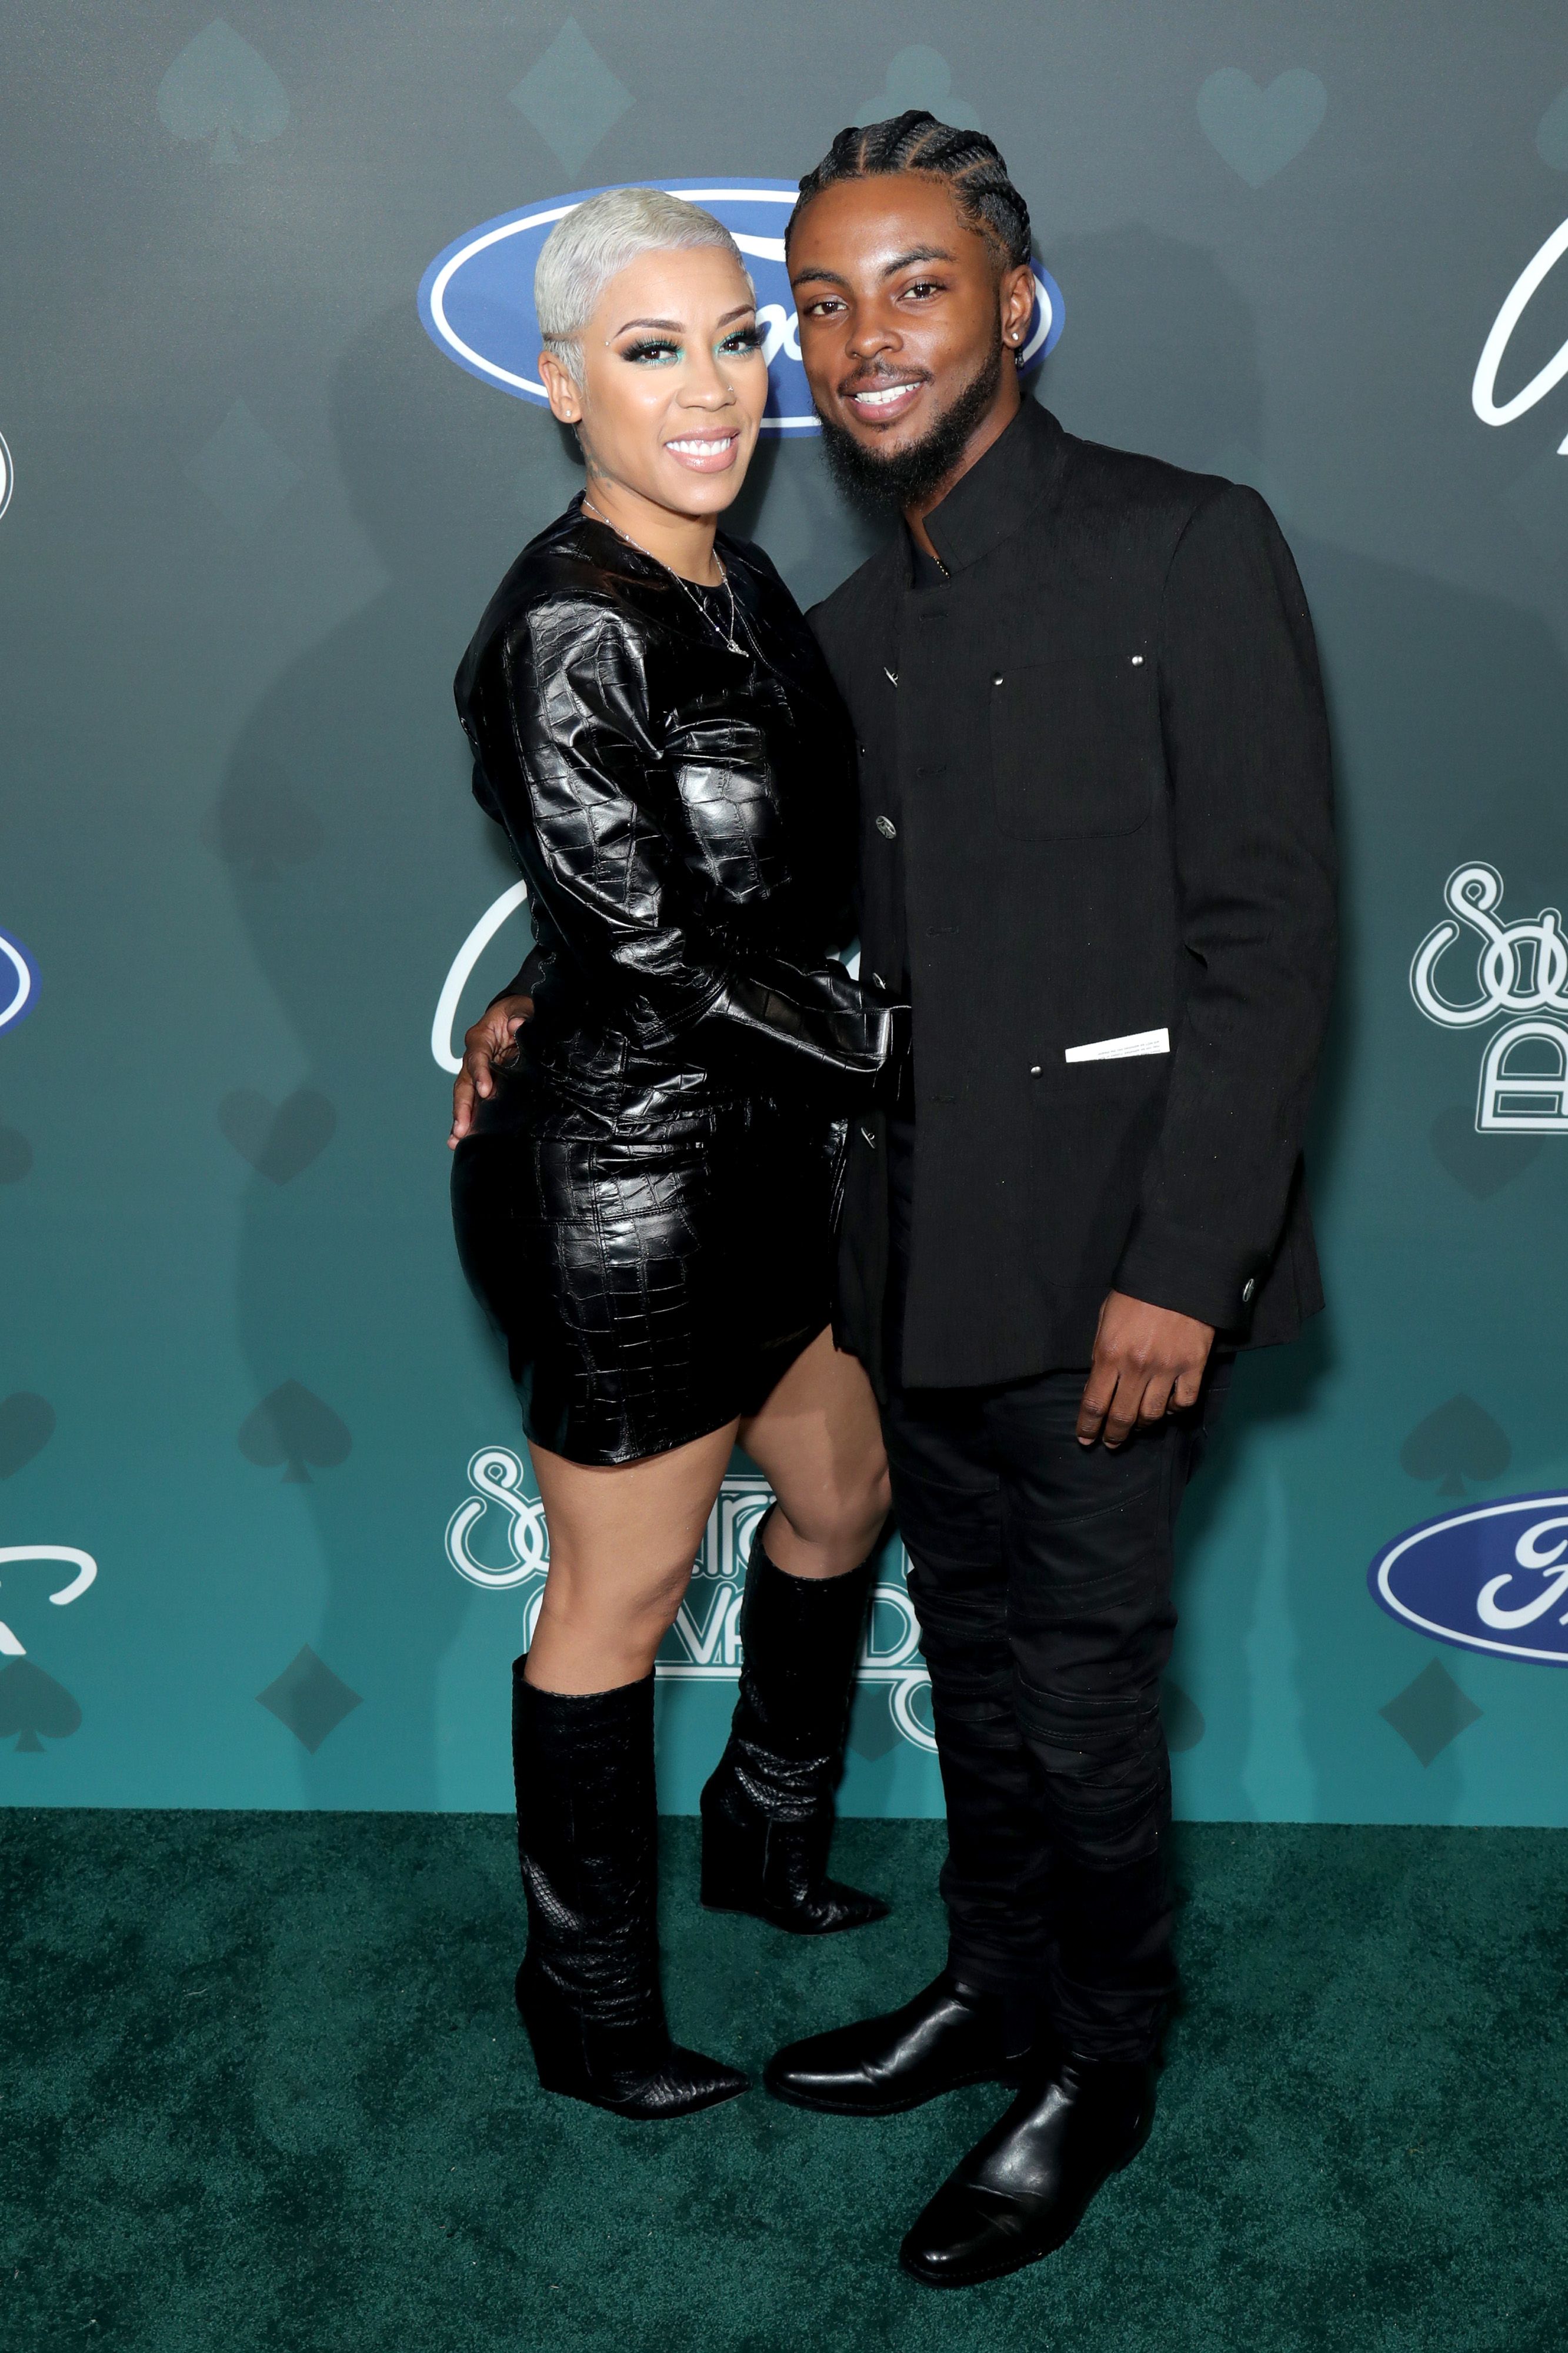 Keyshia Cole and Niko Khale at the 2019 Soul Train Awards at the Orleans Arena on November 17, 2019. | Source: Getty Images